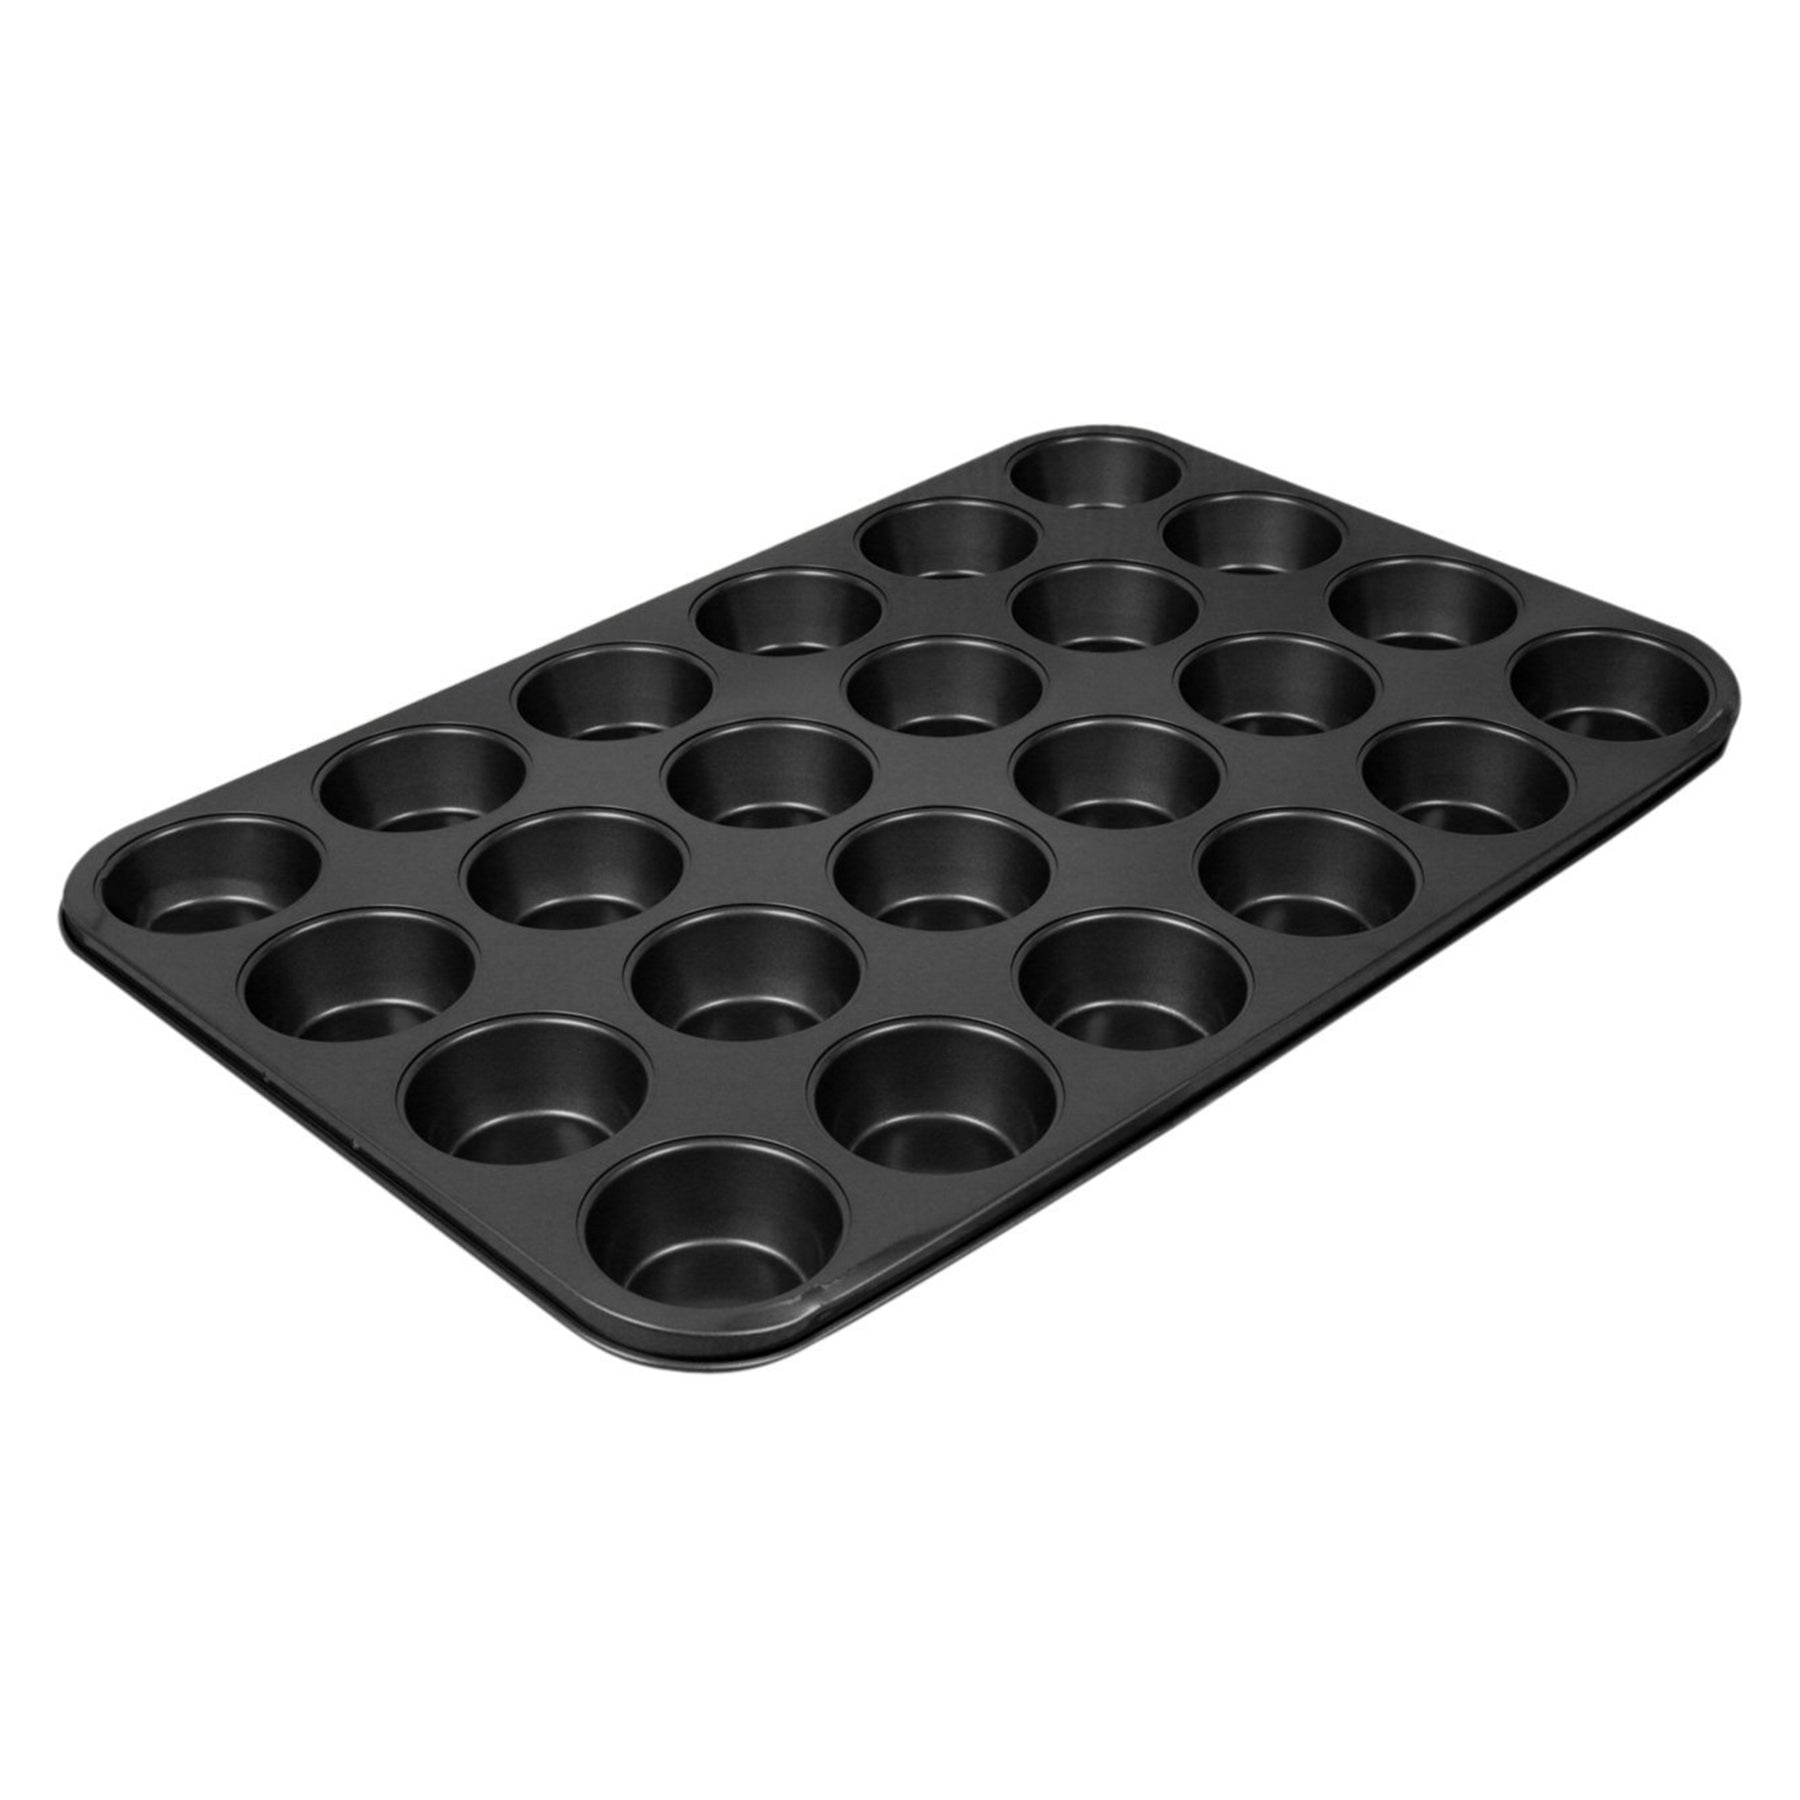 Muffin Pan 24 Cup, Black